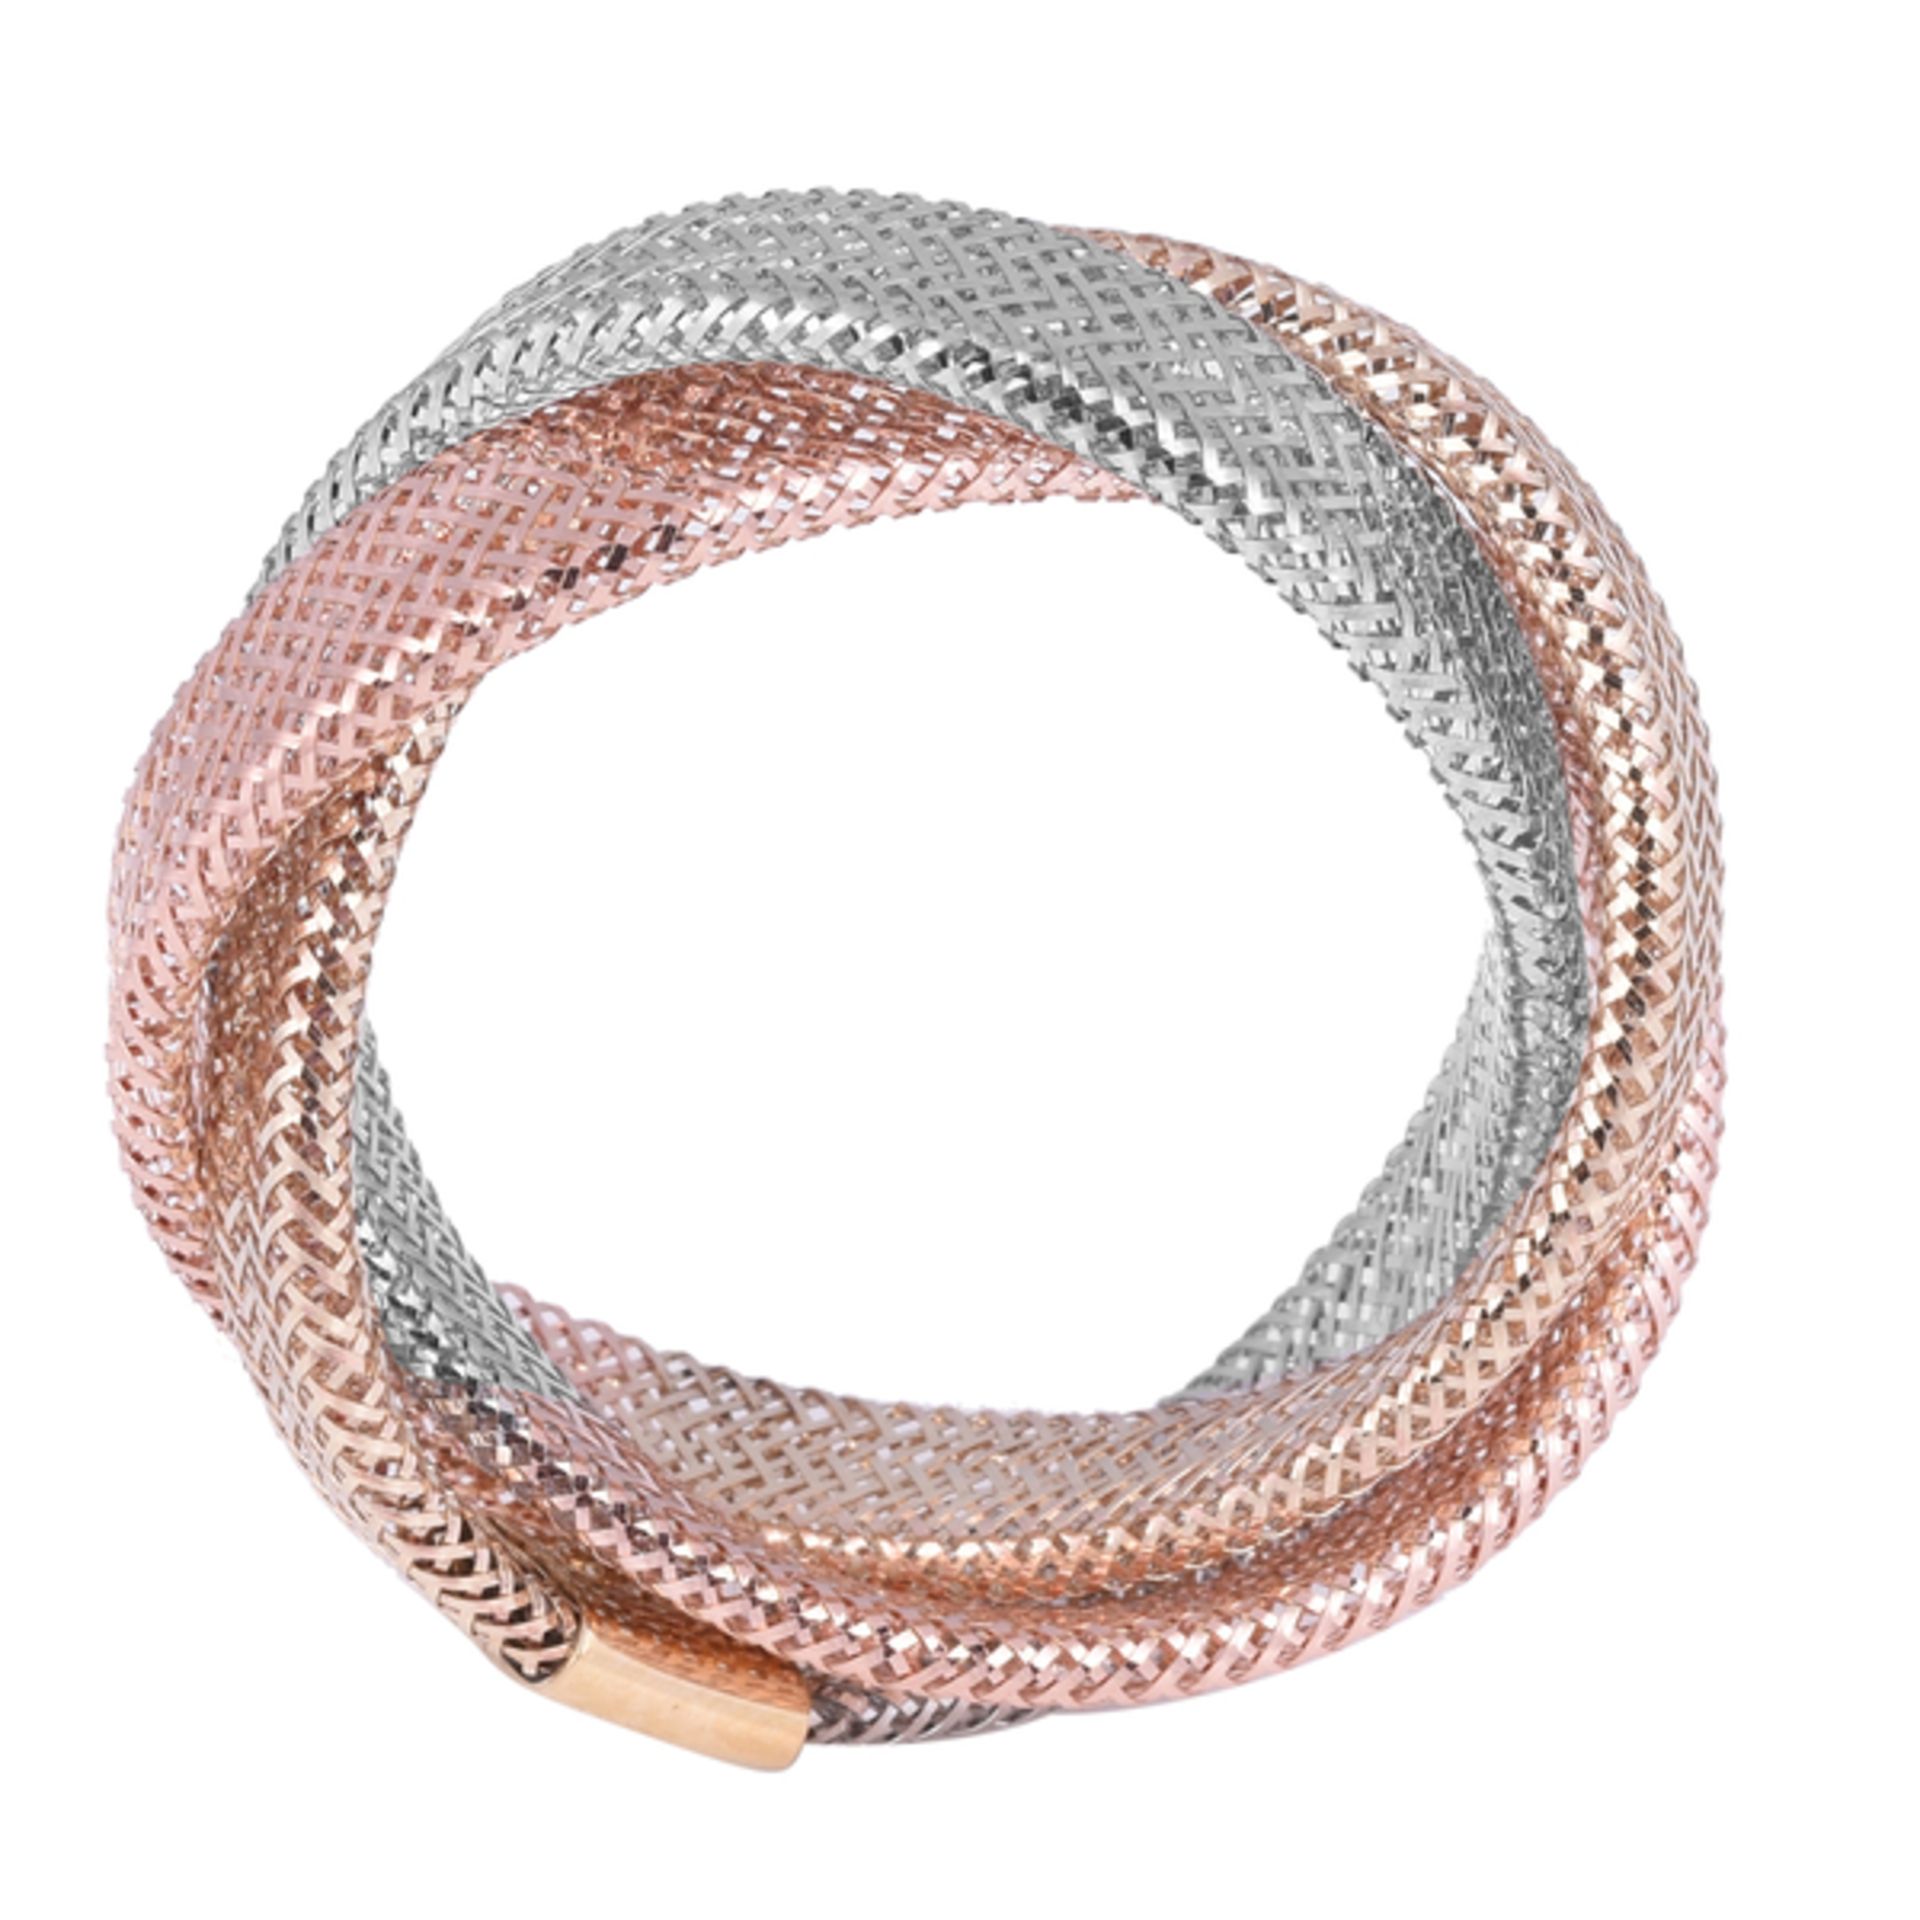 New! Maestro Collection - 9K Tricolour Gold Stretchable Mesh Ring - Image 4 of 5